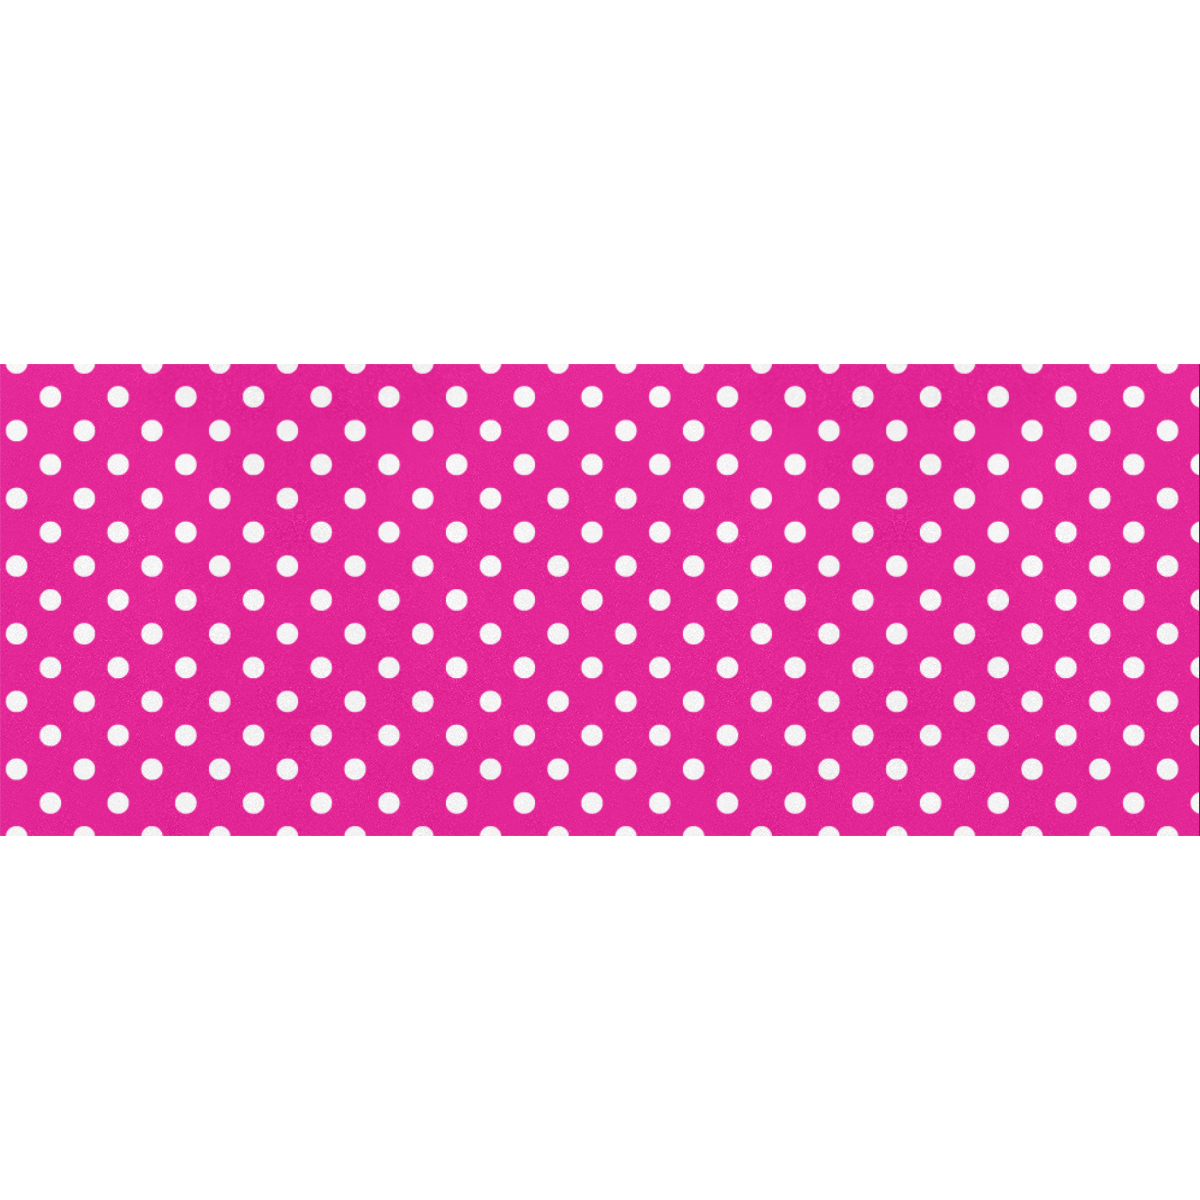 White Polka Dots on Pink Gift Wrapping Paper 58"x 23" (5 Rolls)